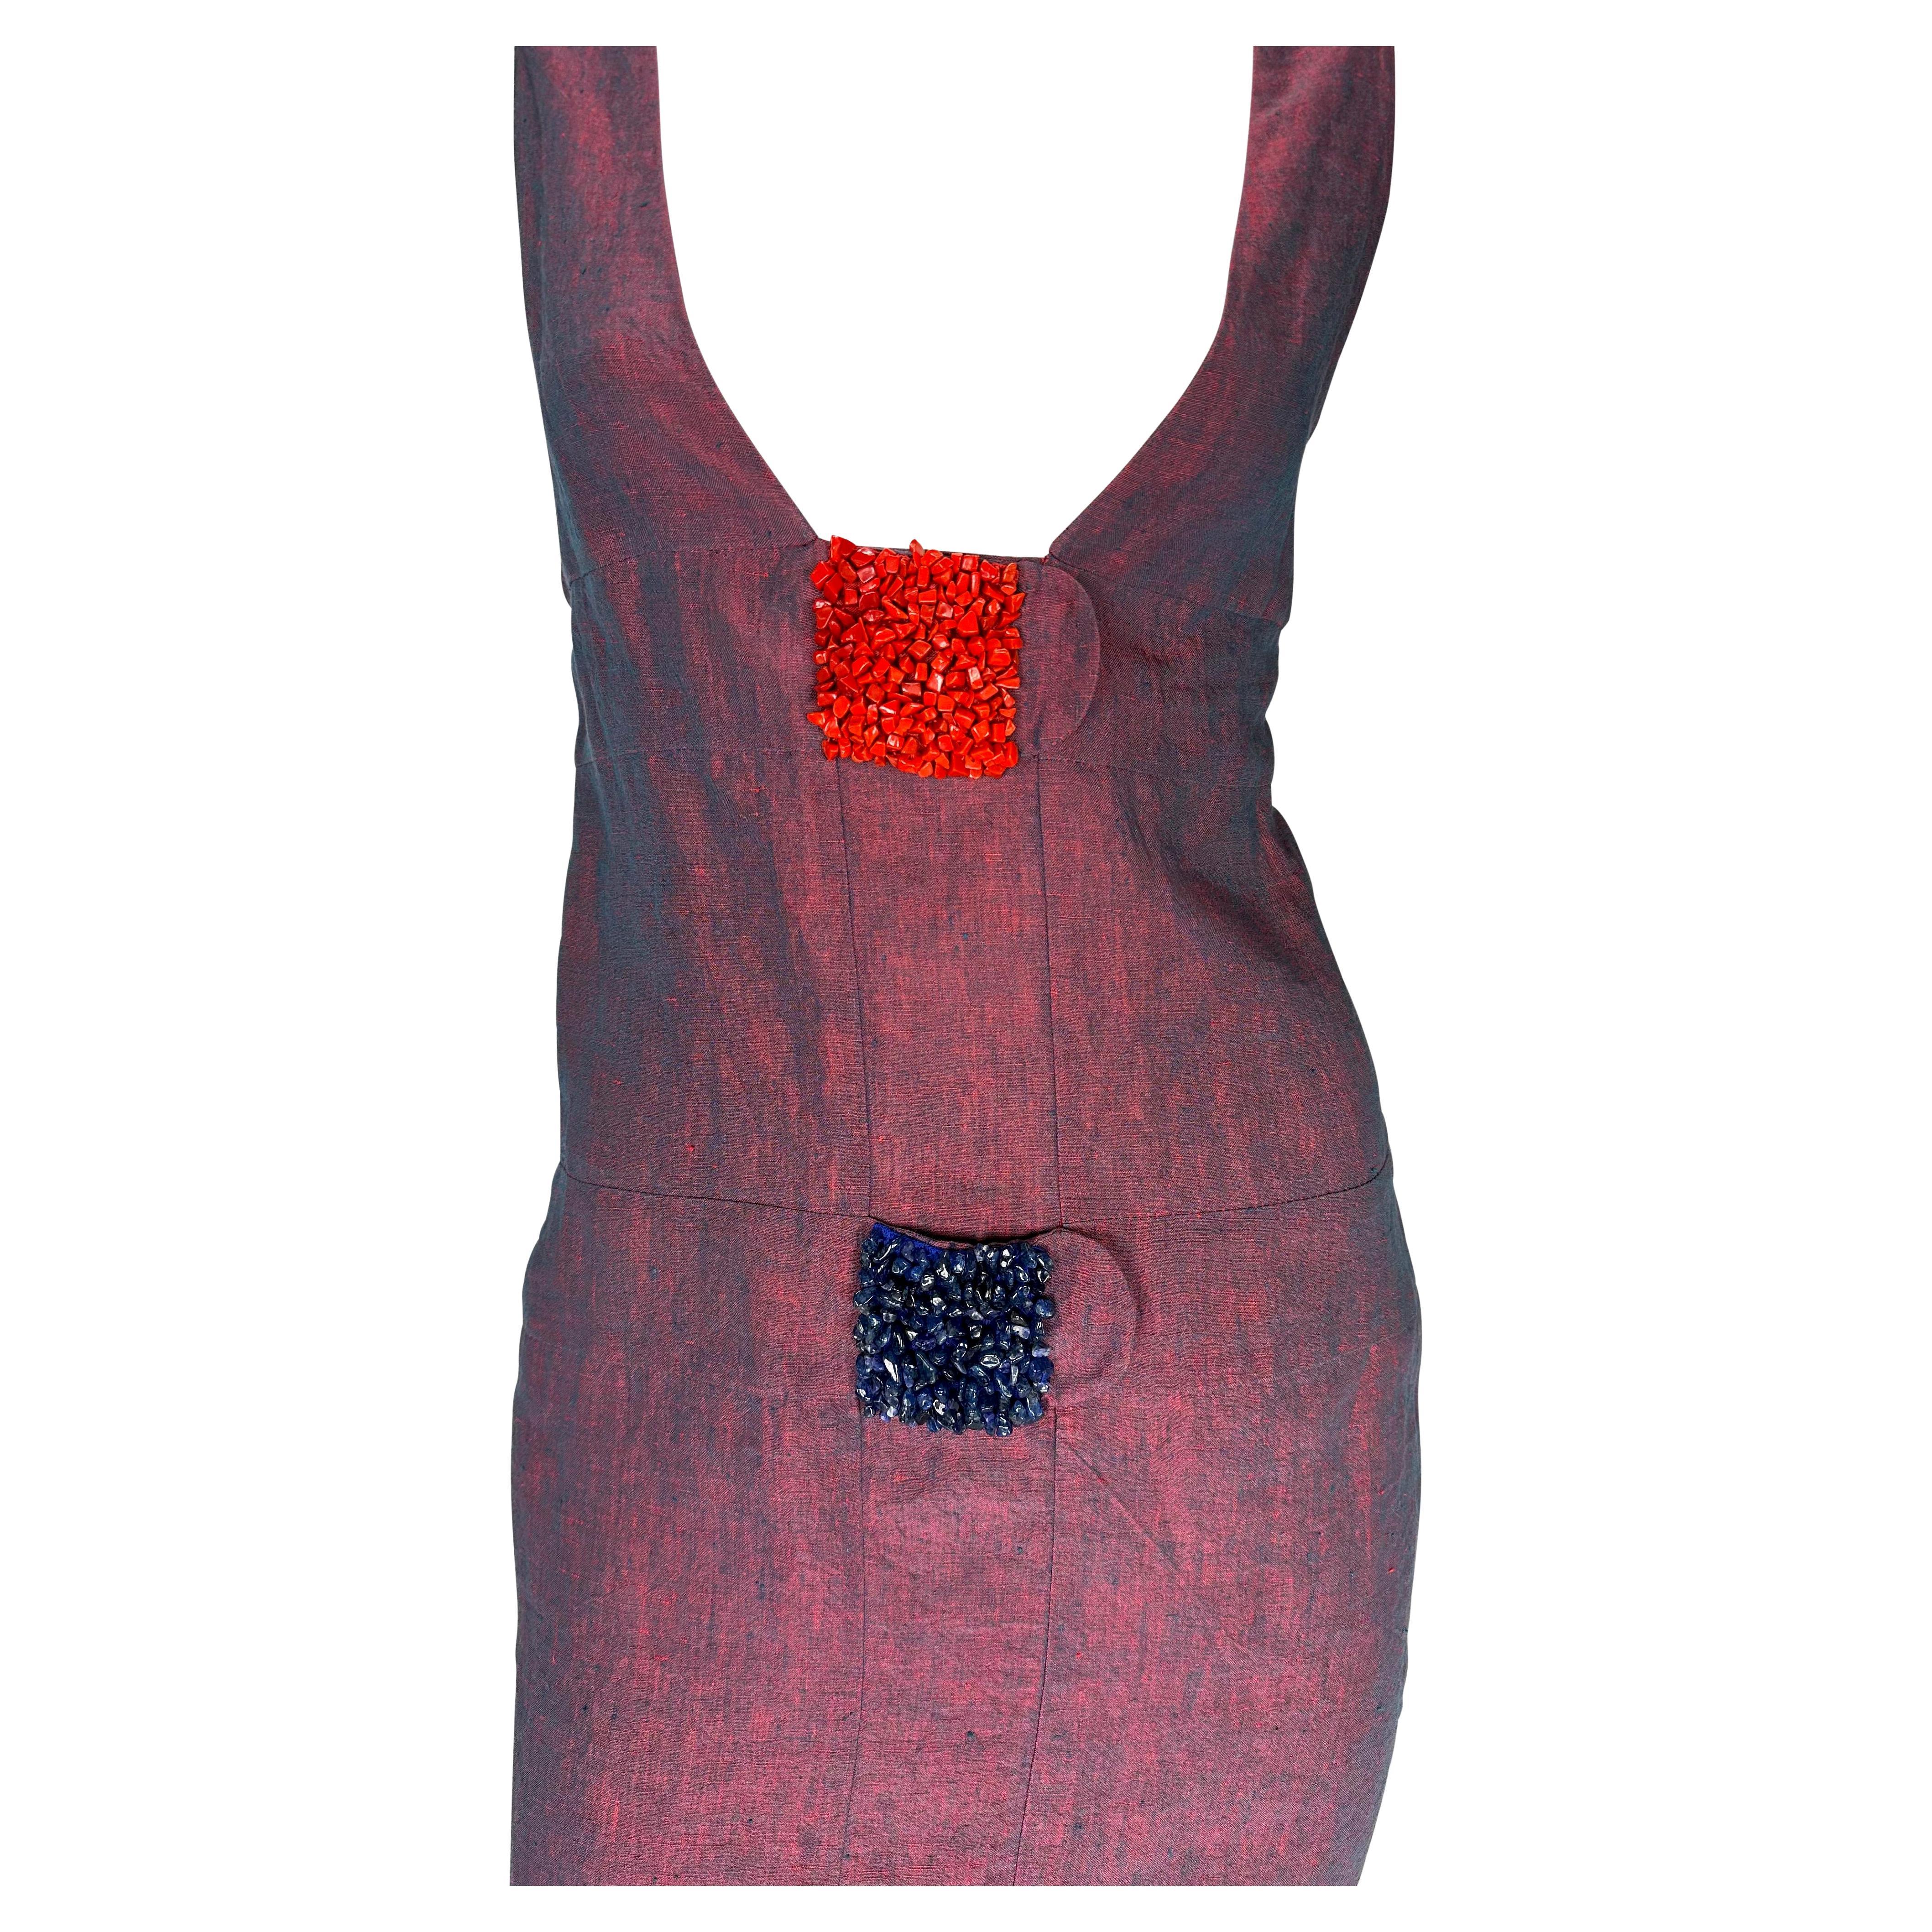 Presenting a beautiful iridescent red linen Fendi dress, designed by Karl Lagerfeld. From the 1990s, this dress features a deep neckline, red and black beaded squares at the front, and a semi-exposed back. This never worn dress is made complete with